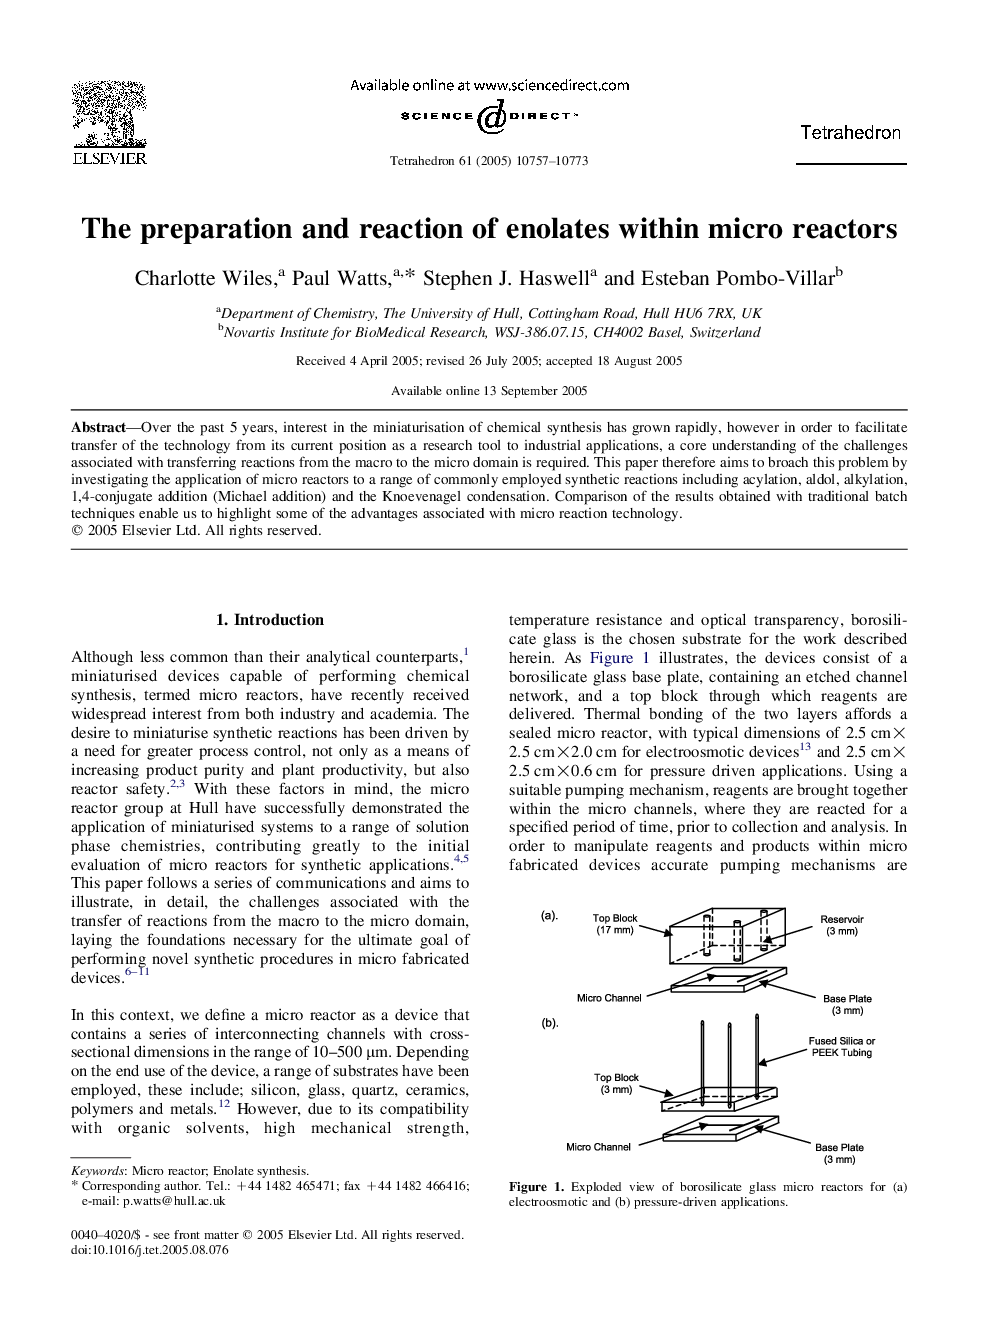 The preparation and reaction of enolates within micro reactors